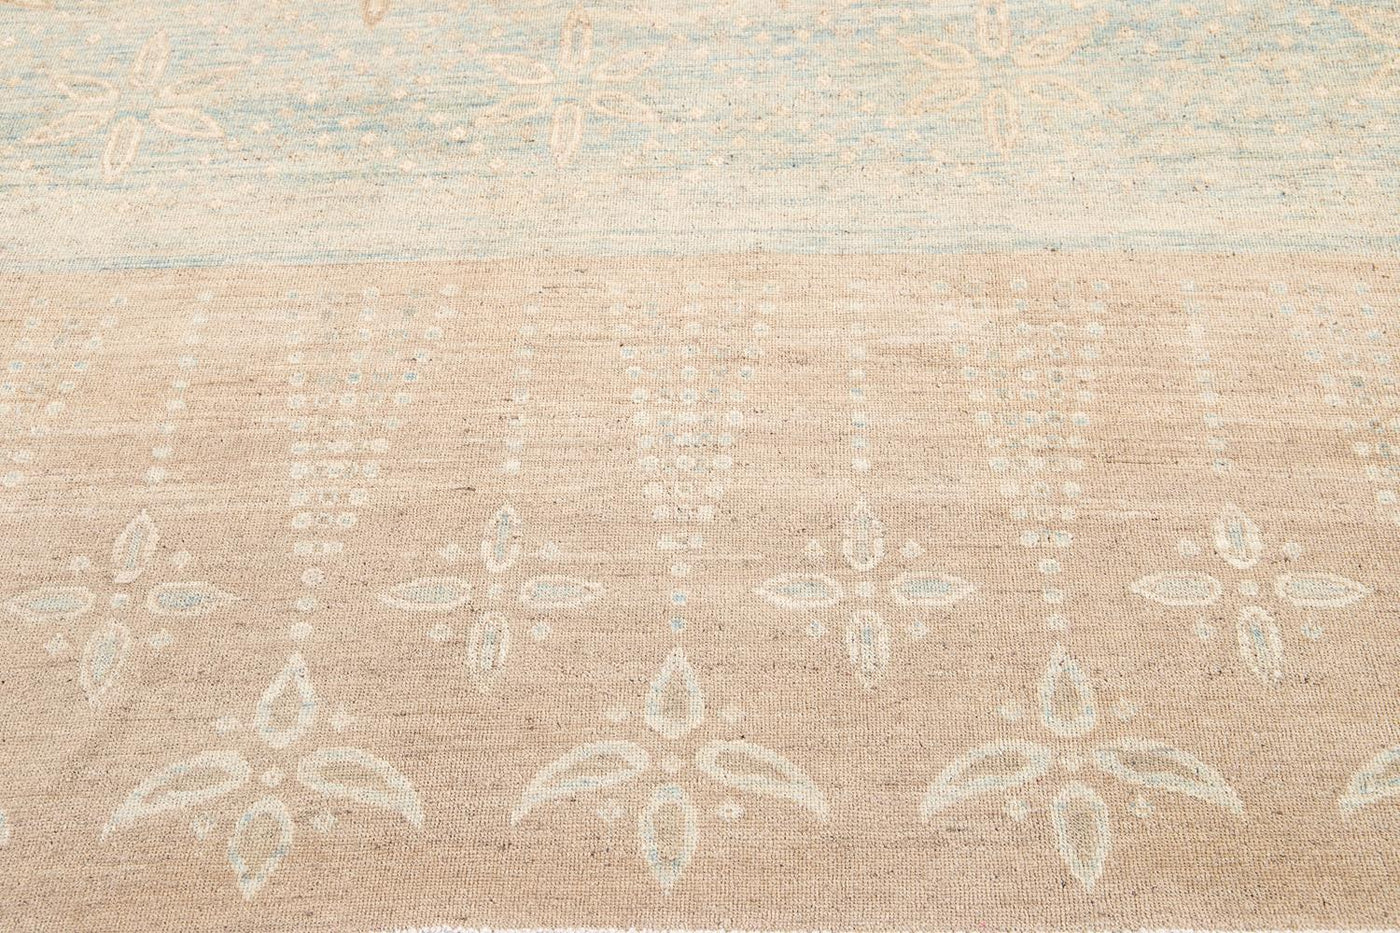 21st Century Contemporary Transitional Wool Rug 10' x 13'